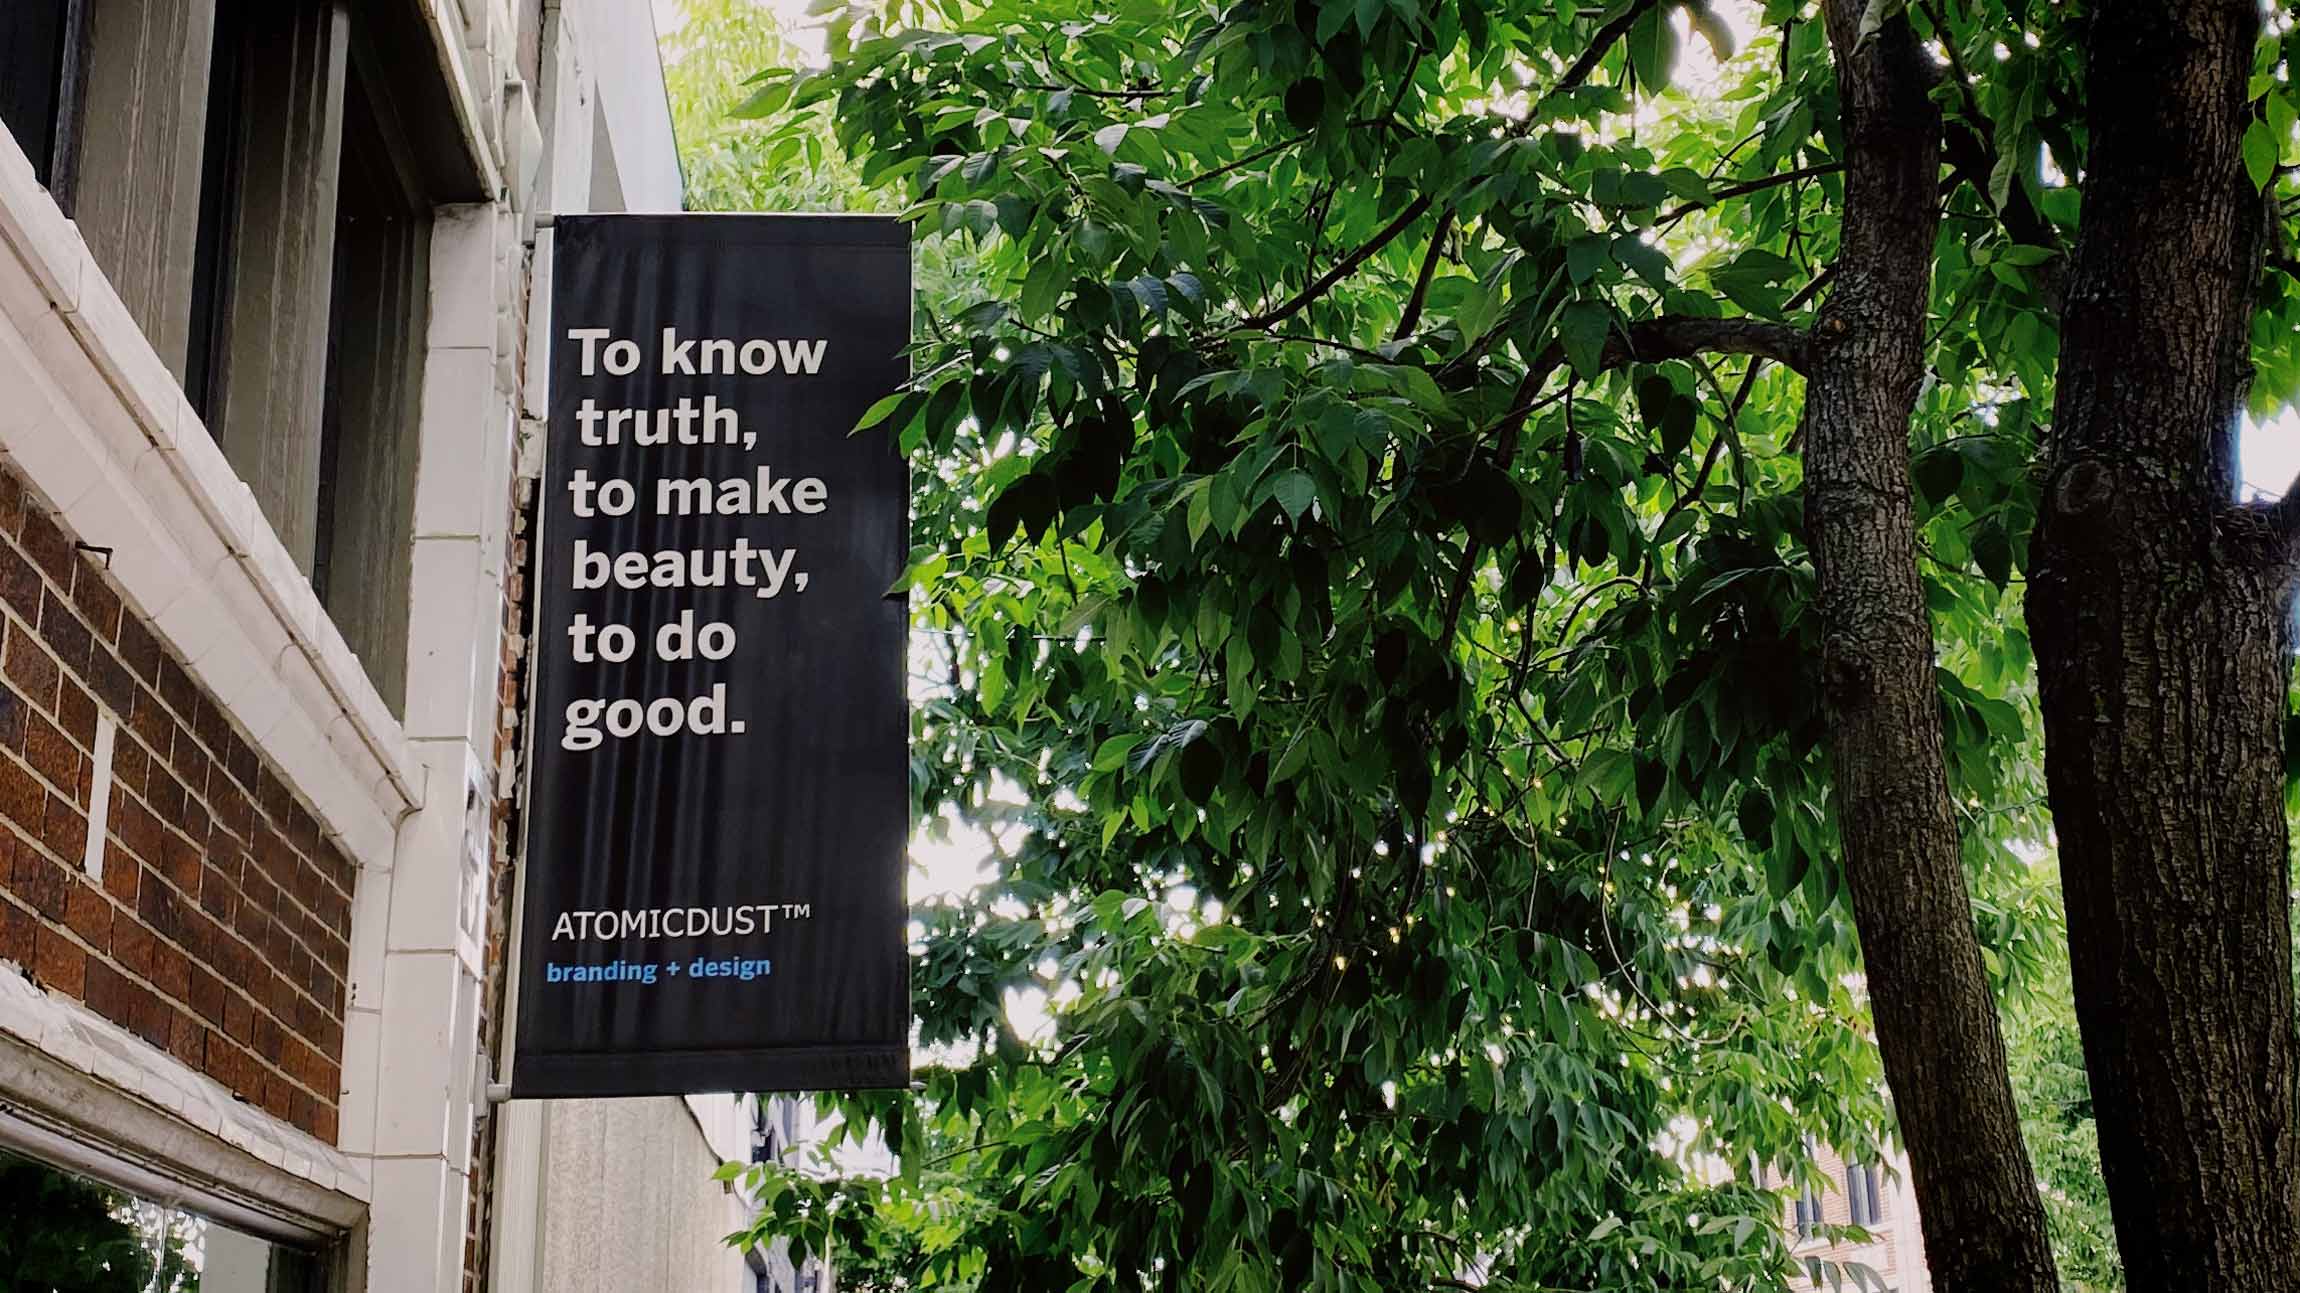 The banner that hangs outside Atomicdust's office reads "To know truth, to make beauty, to do good."